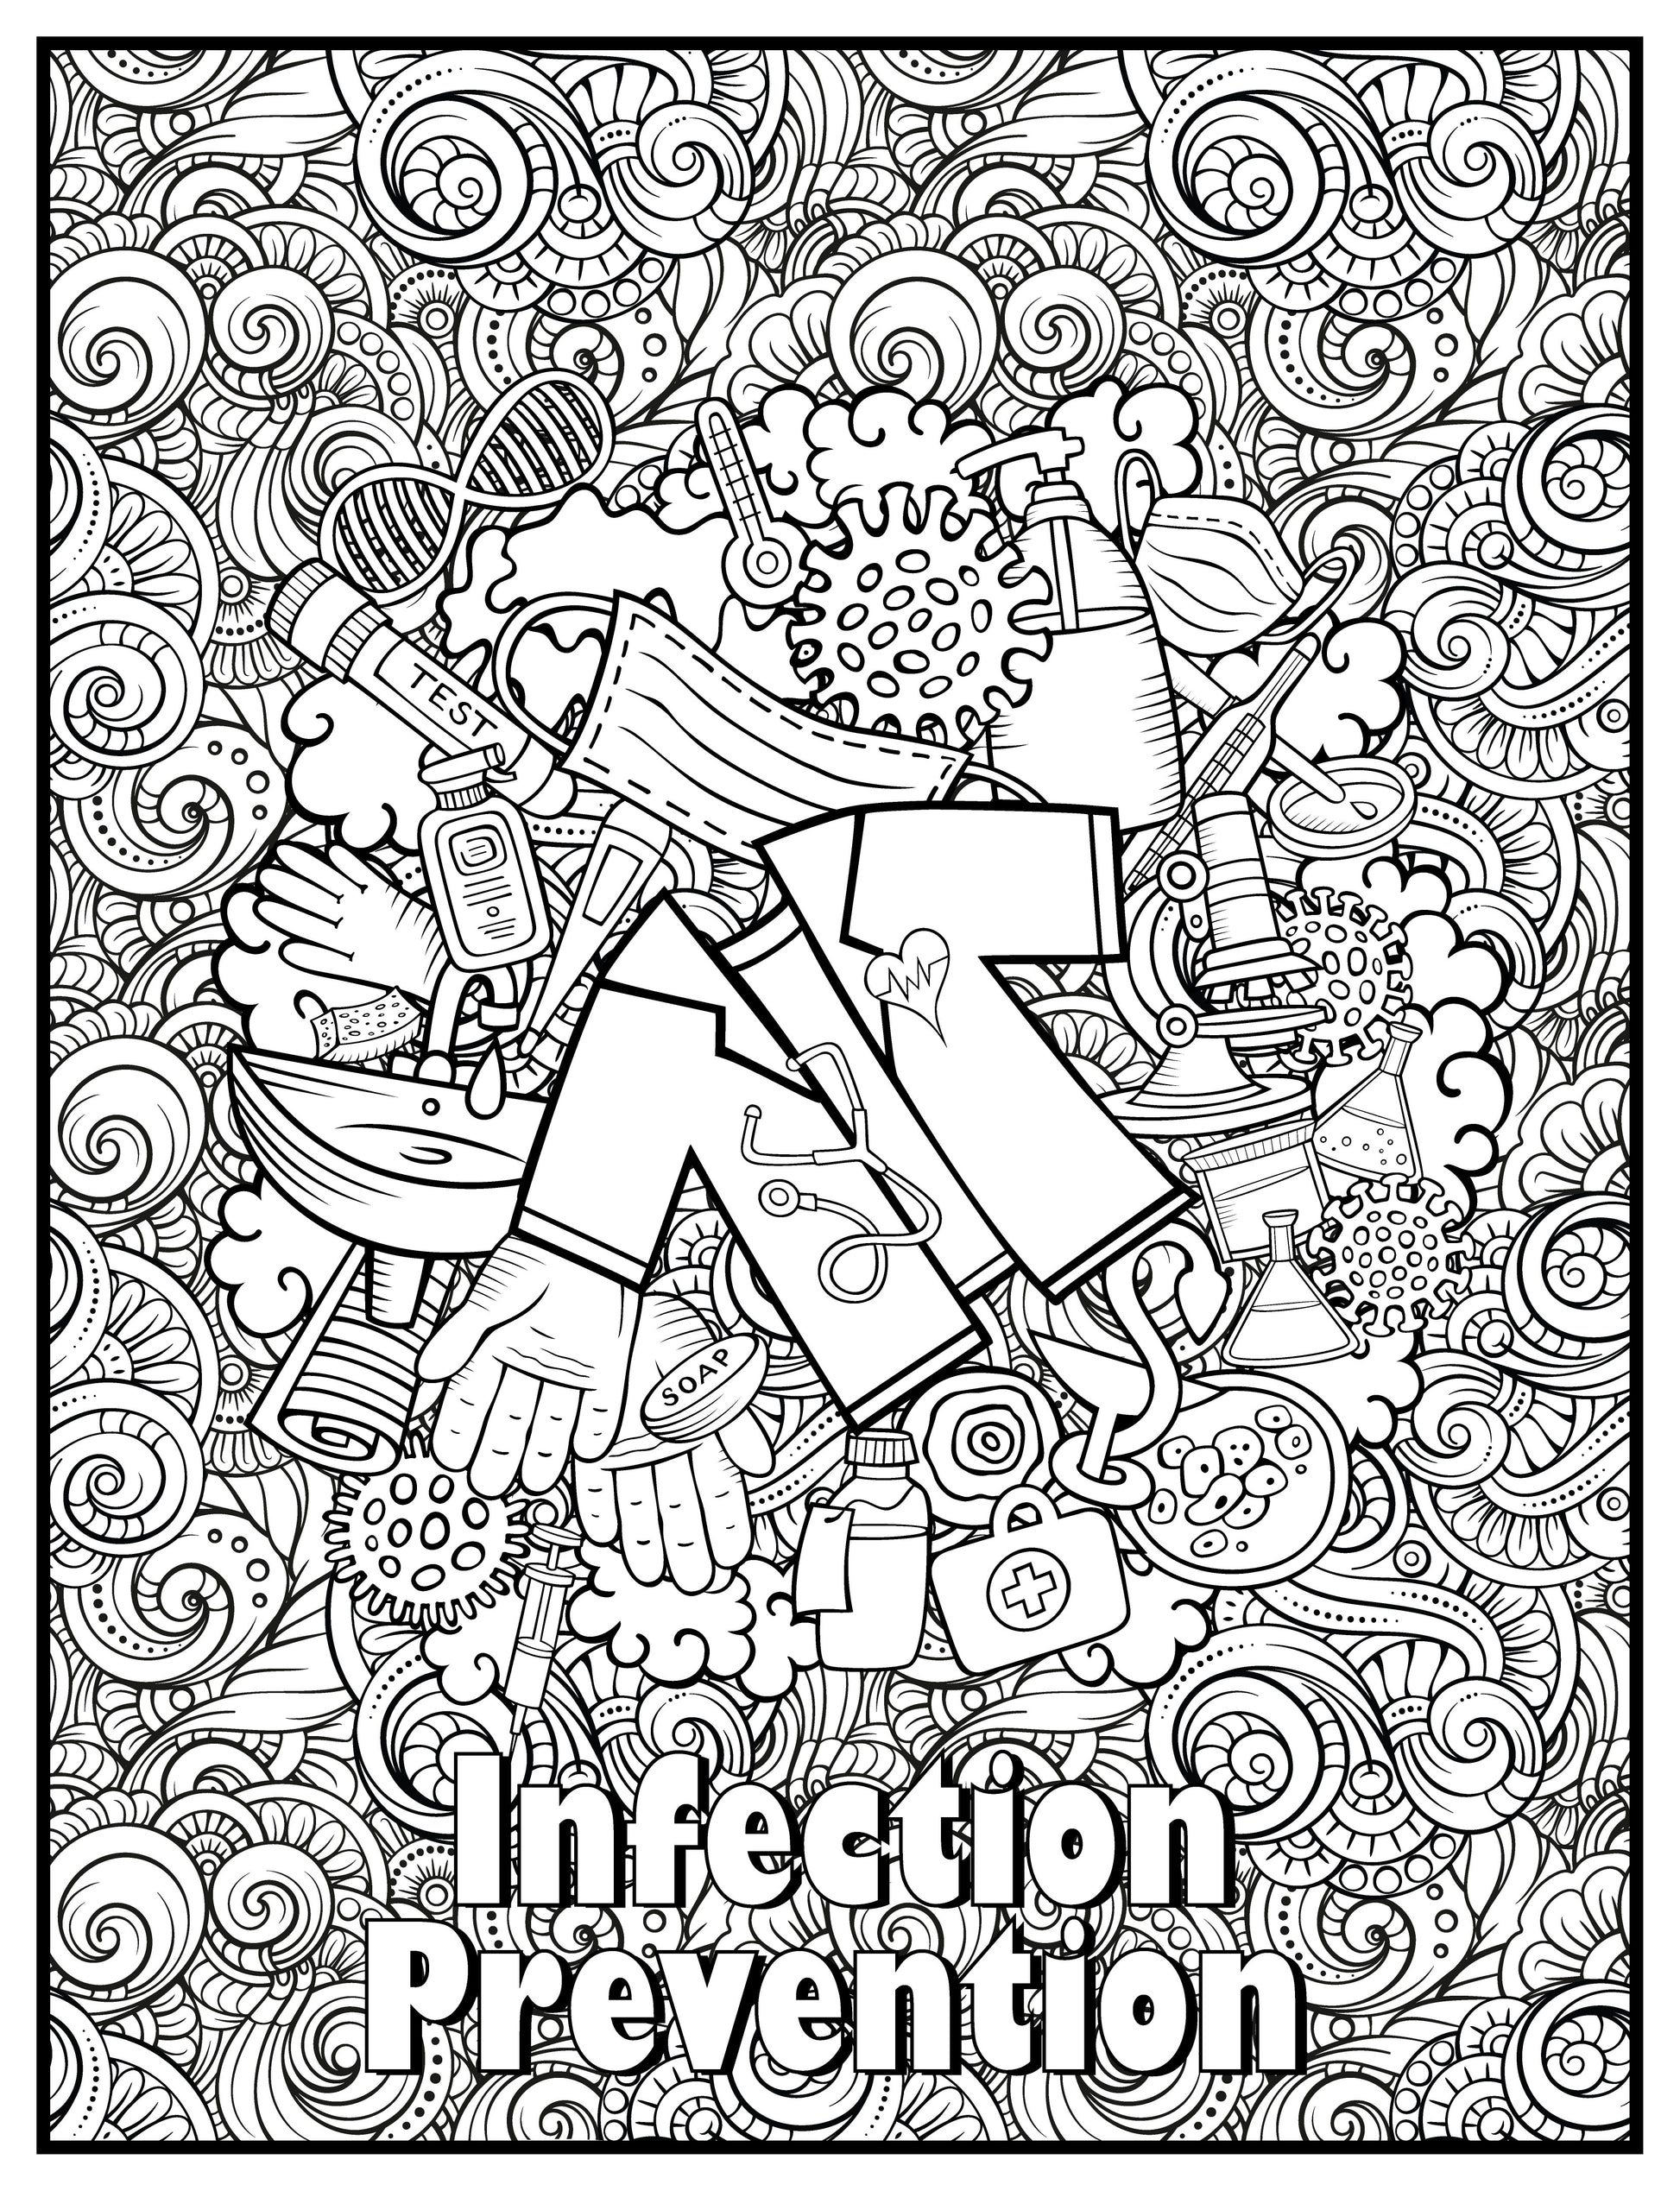 Infection prevention personalized giant coloring poster x â debbie lynn